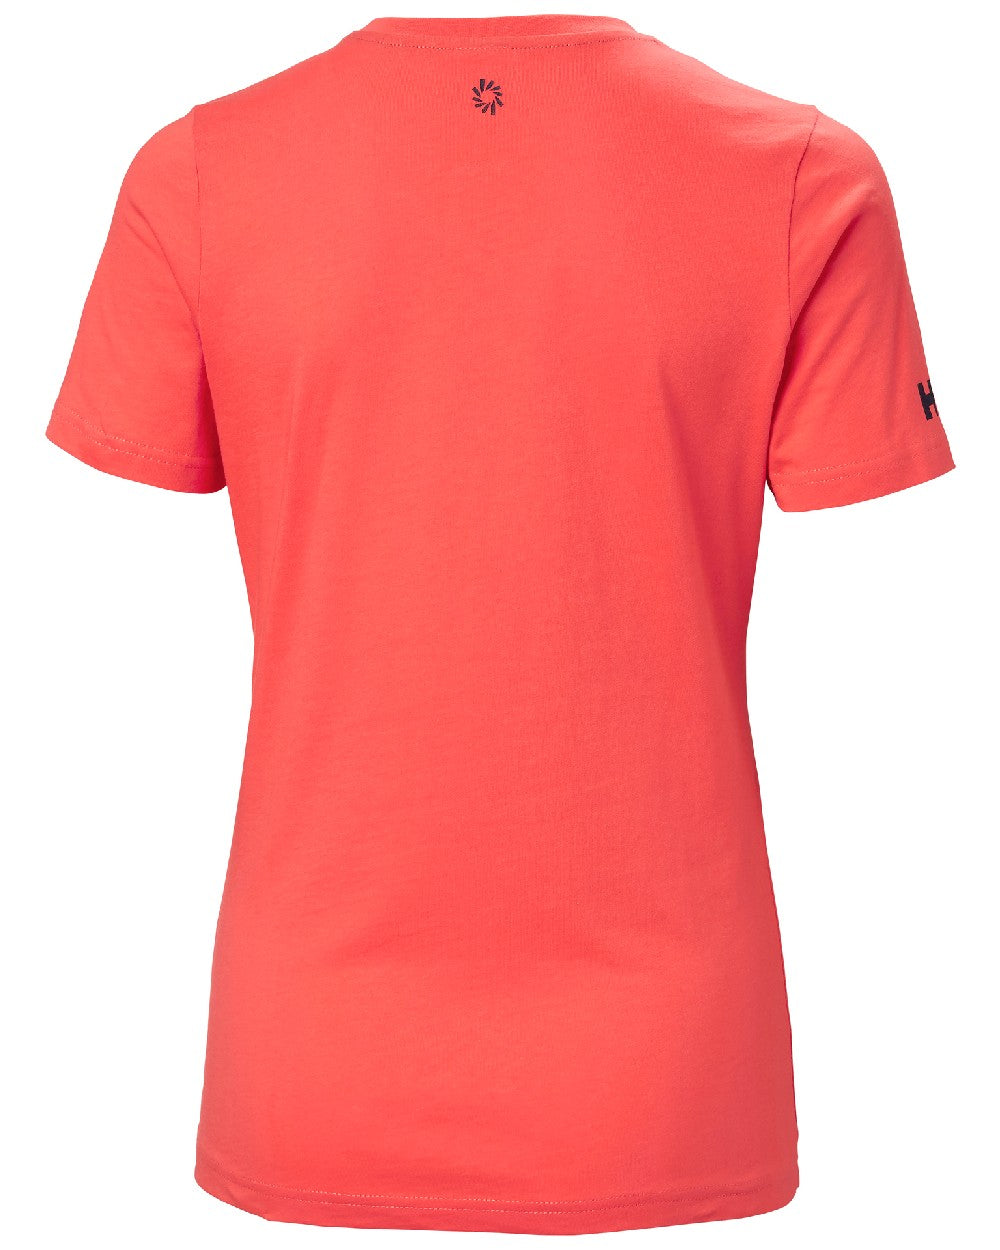 Hot Coral coloured Helly Hansen Womens Ocean Race T-Shirt on white background 